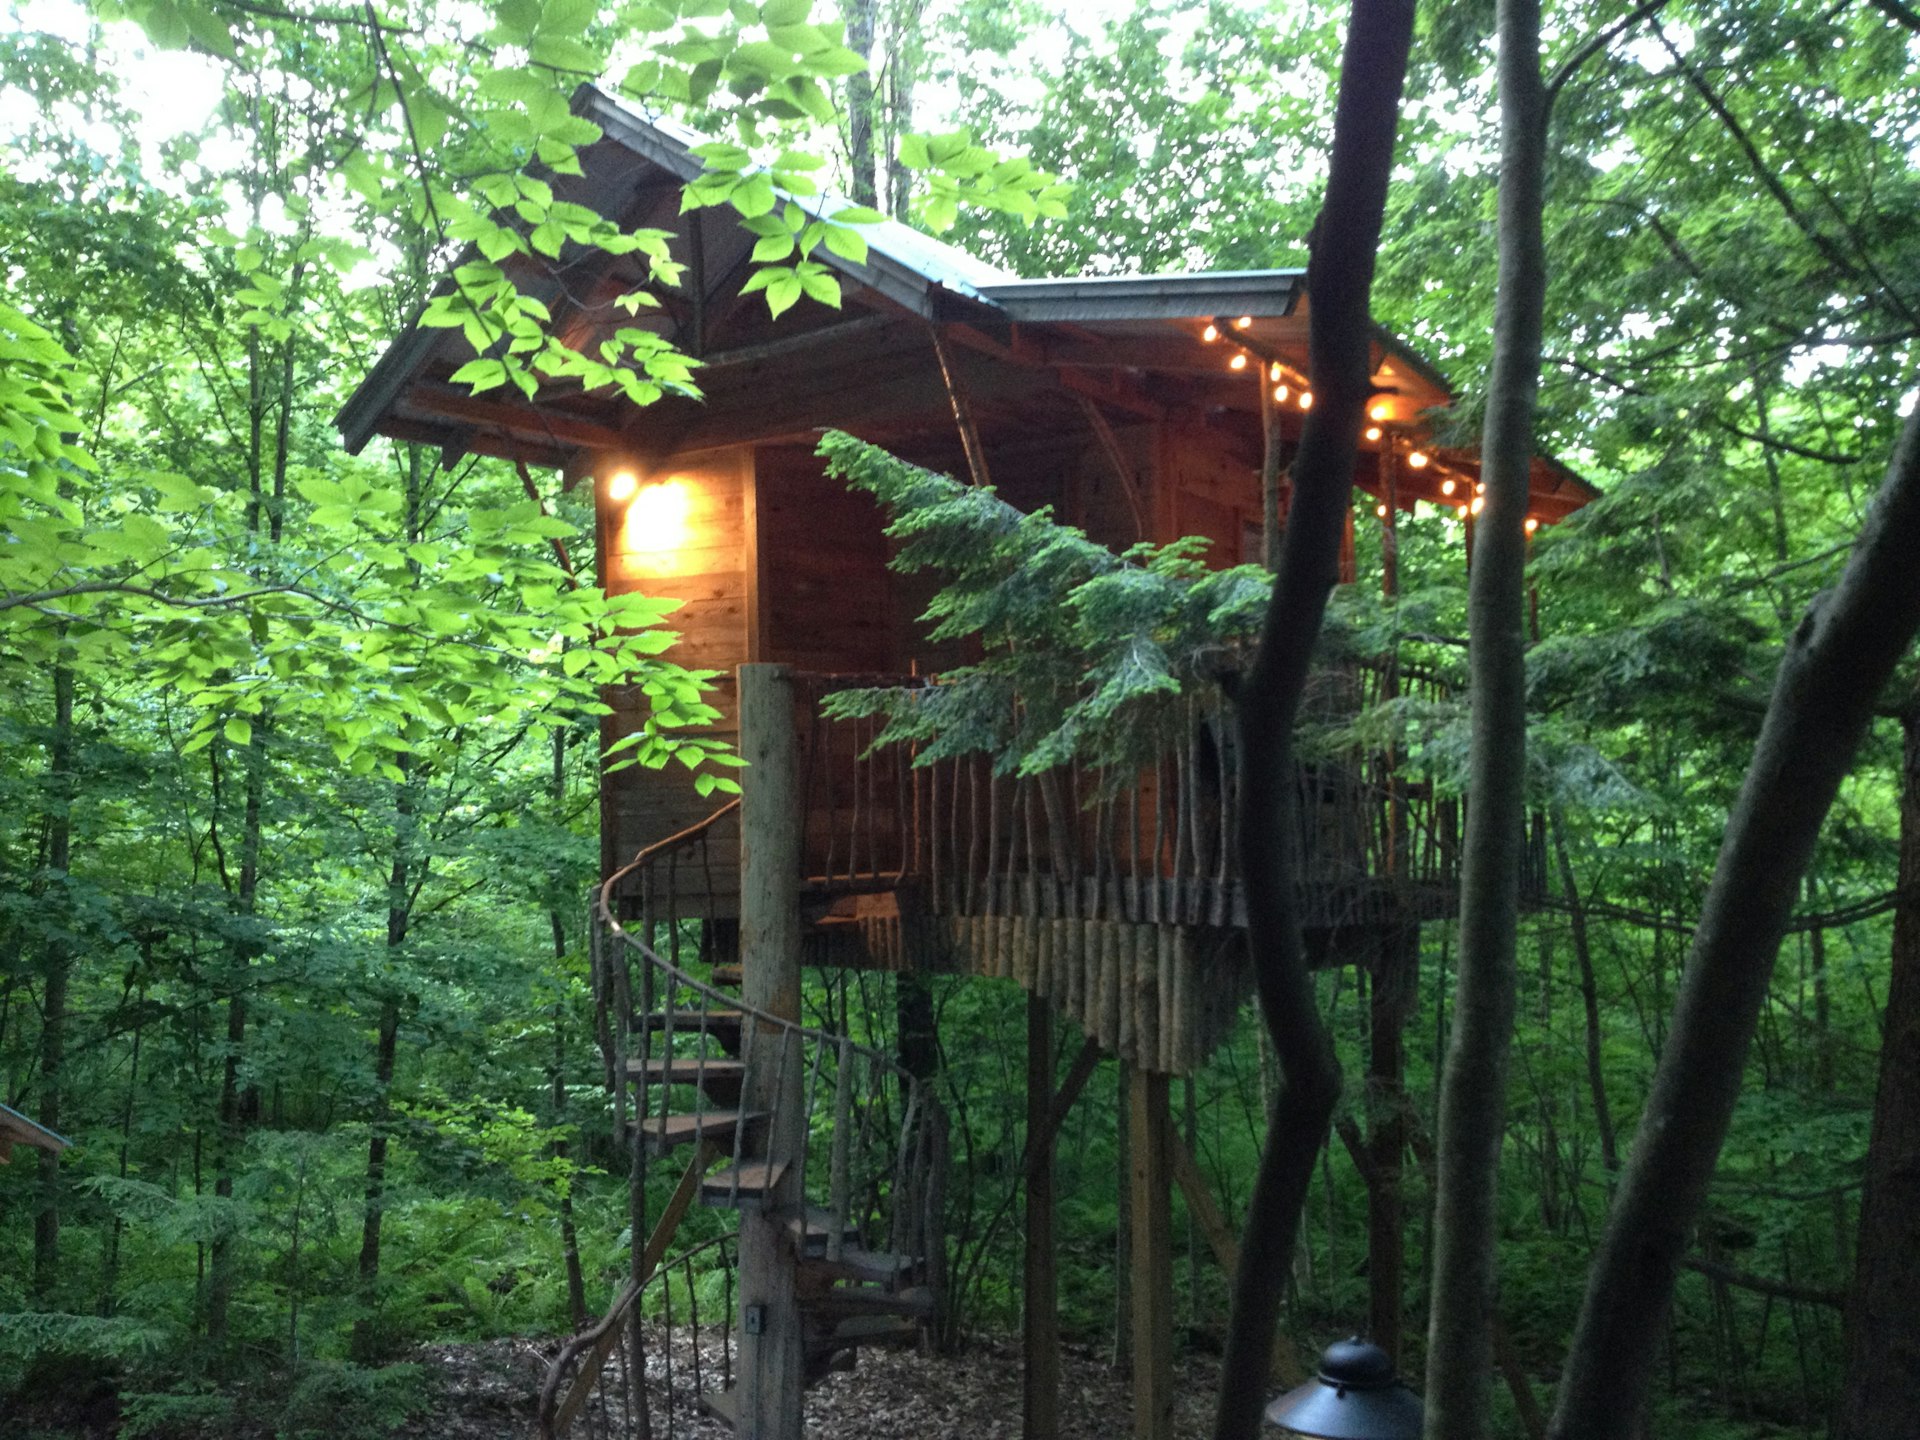 A spiral staircase leads up to the Adirondack tree house retreat, surrounded by a lush green forest